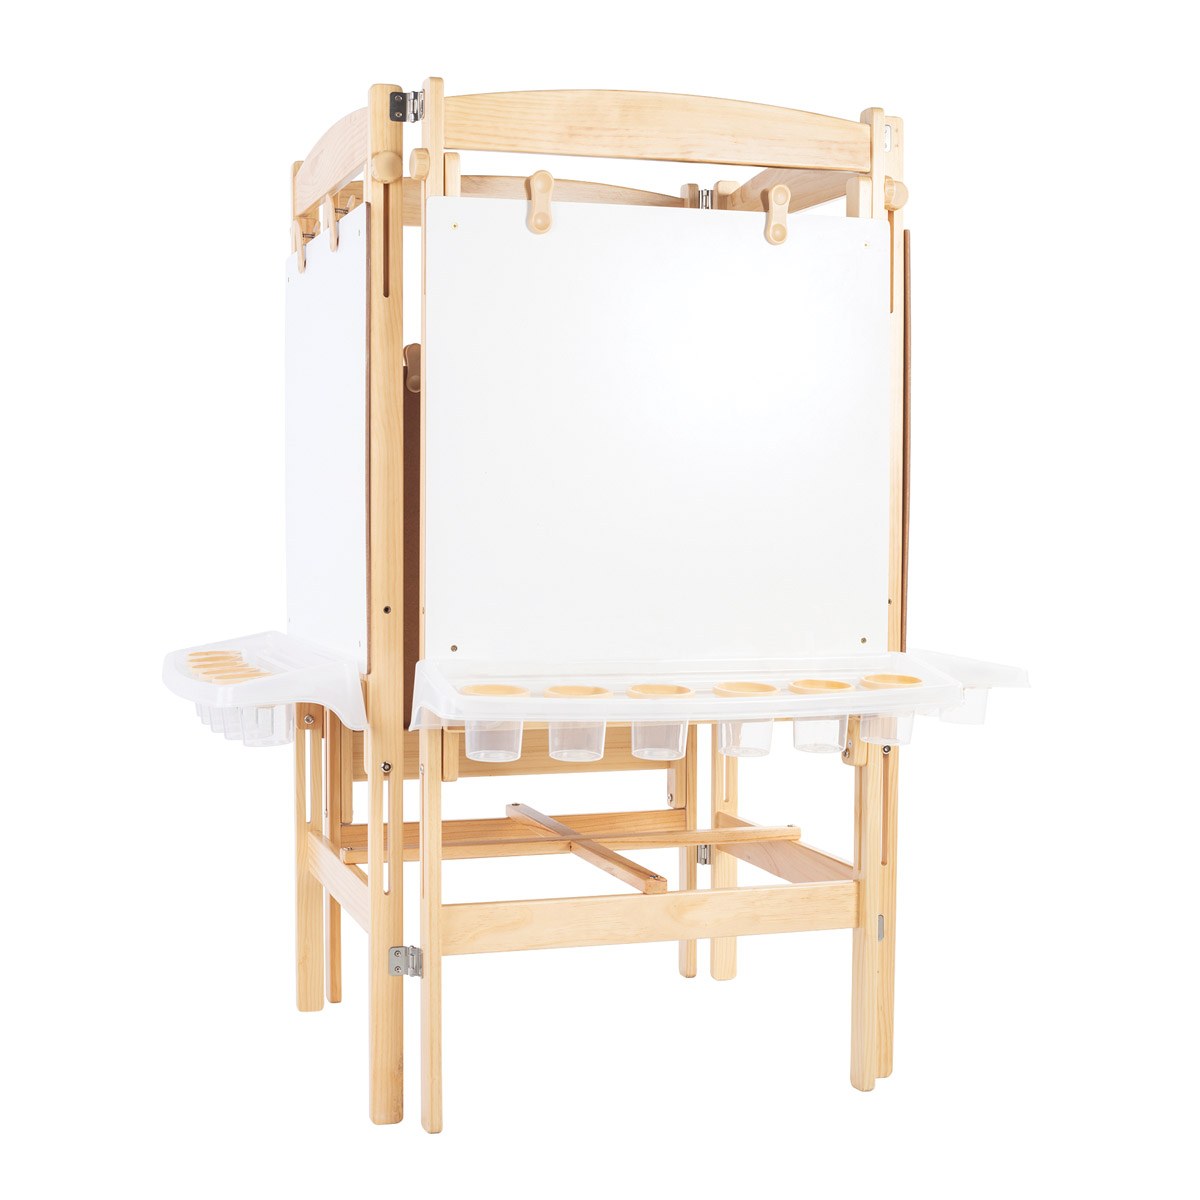 Kaplan Early Learning Company Adjustable 4-Sided Easel